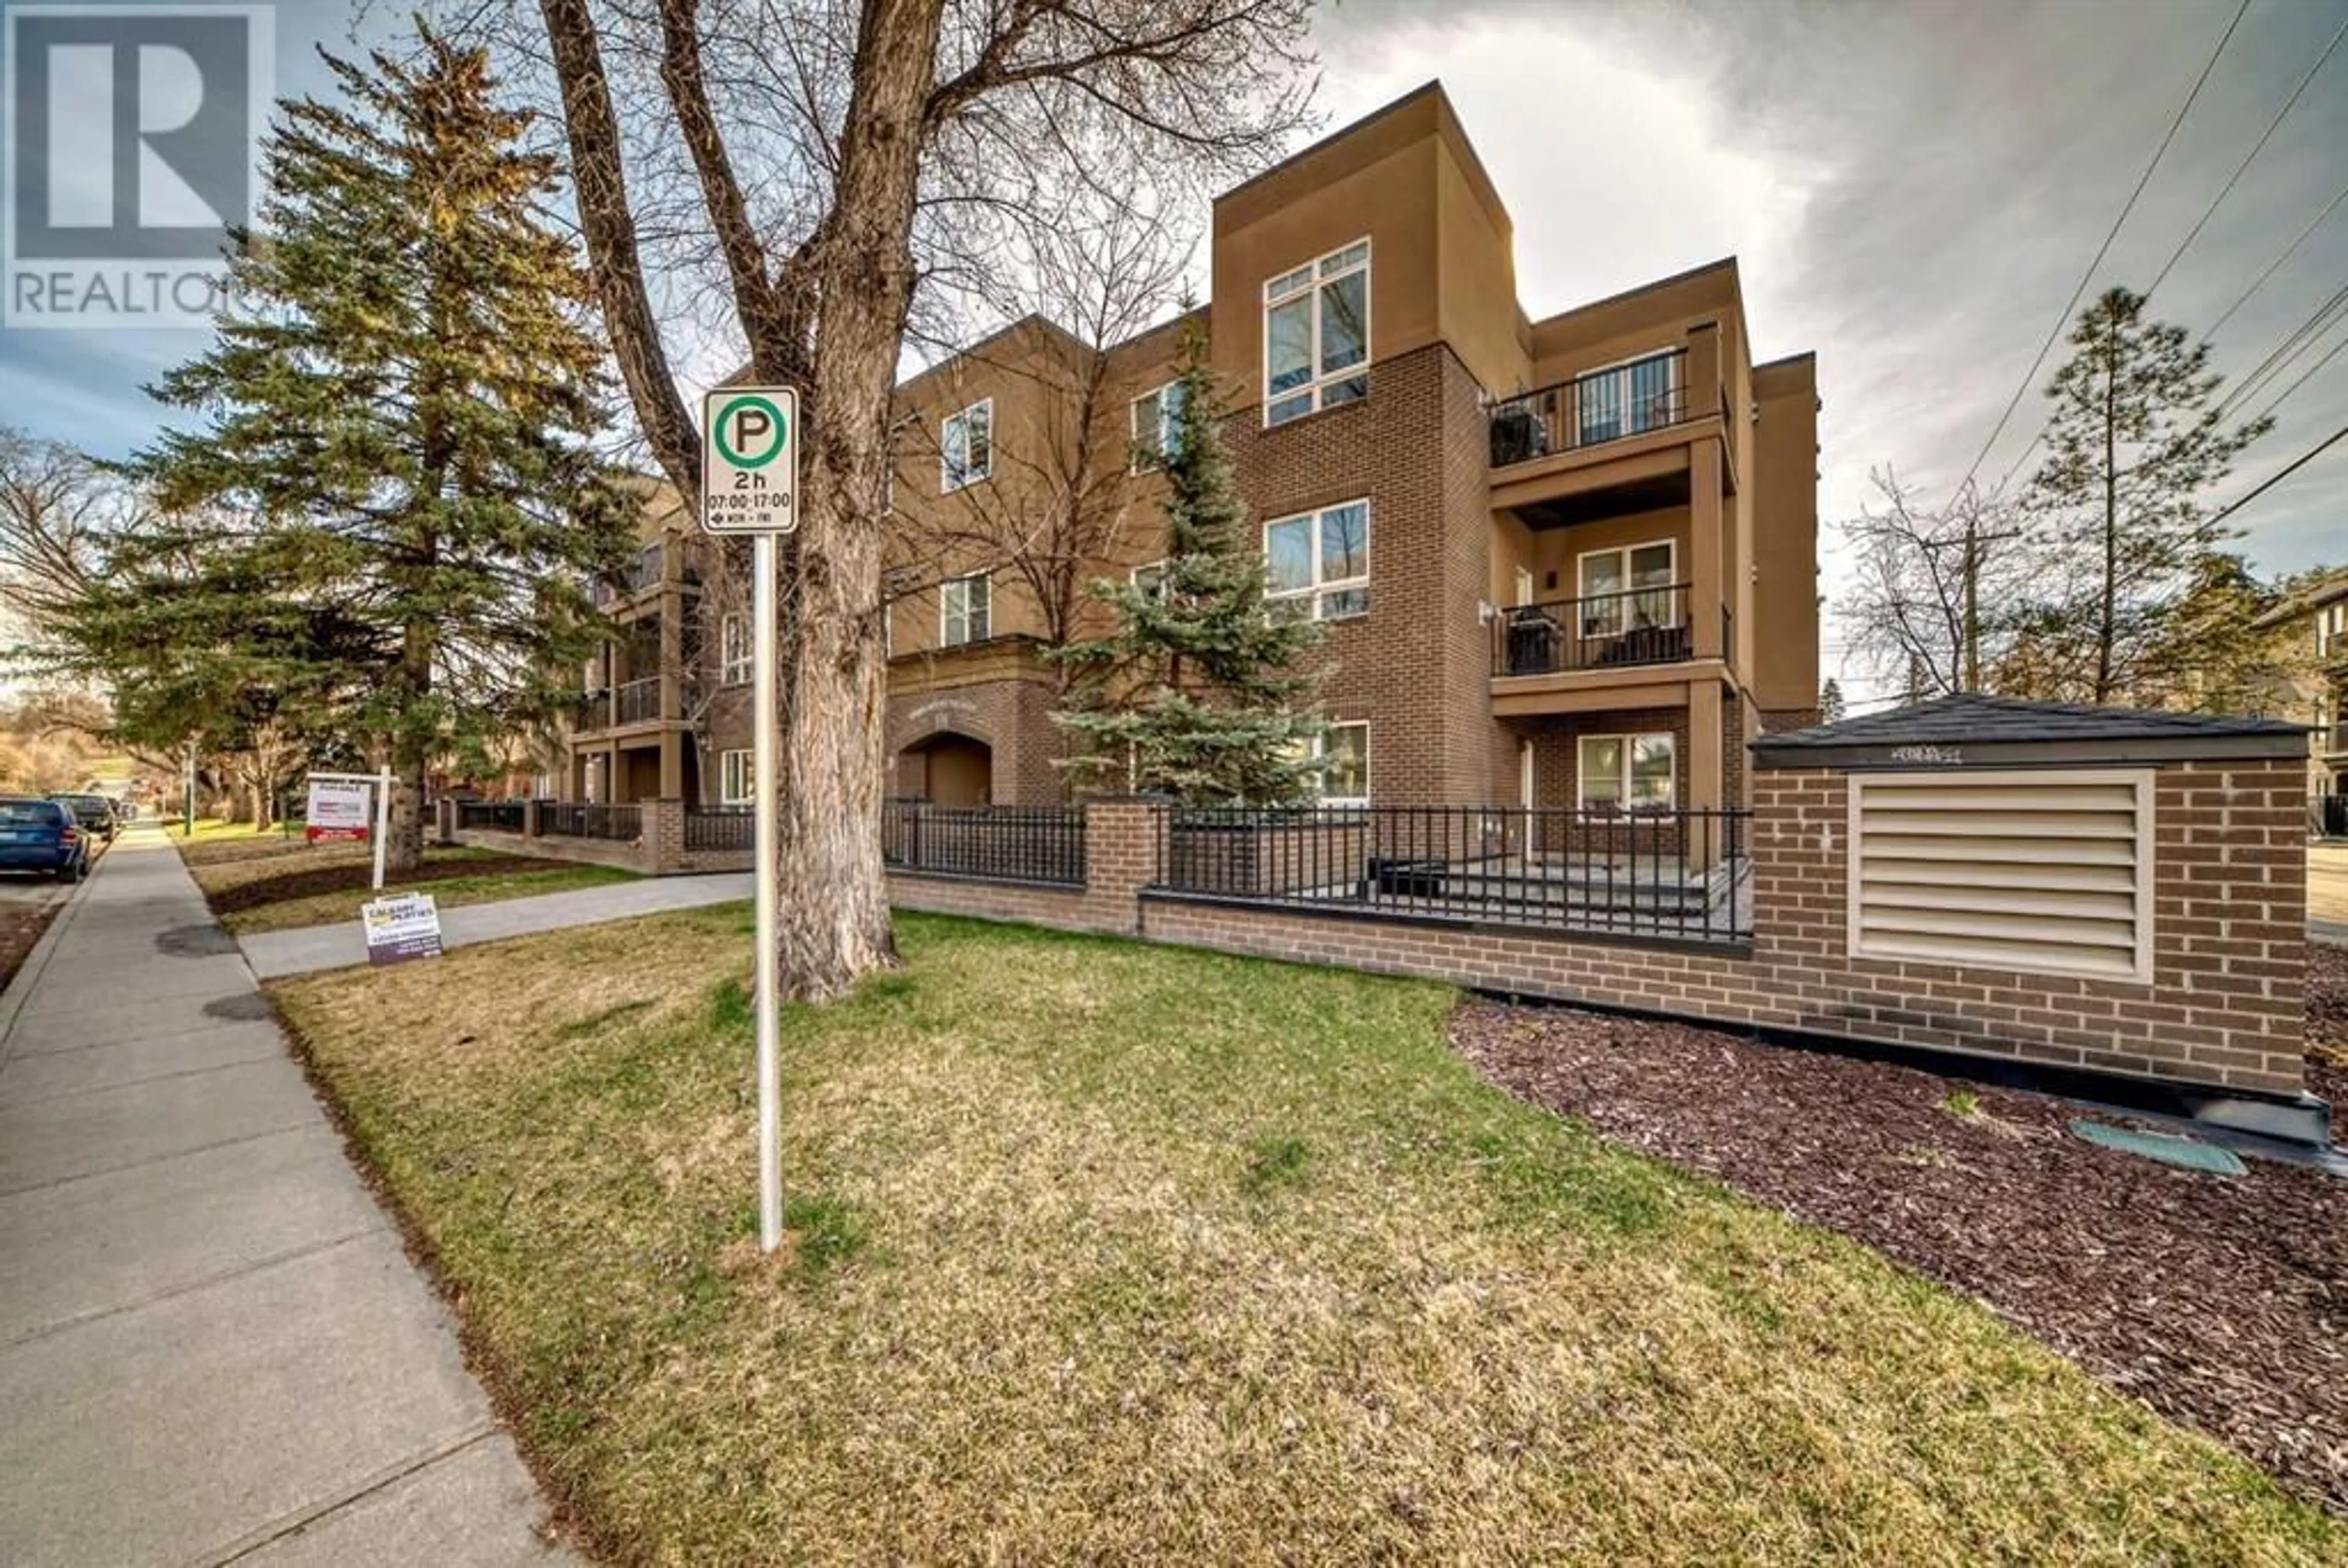 A pic from exterior of the house or condo for 202 518 33 Street NW, Calgary Alberta T2N2W4